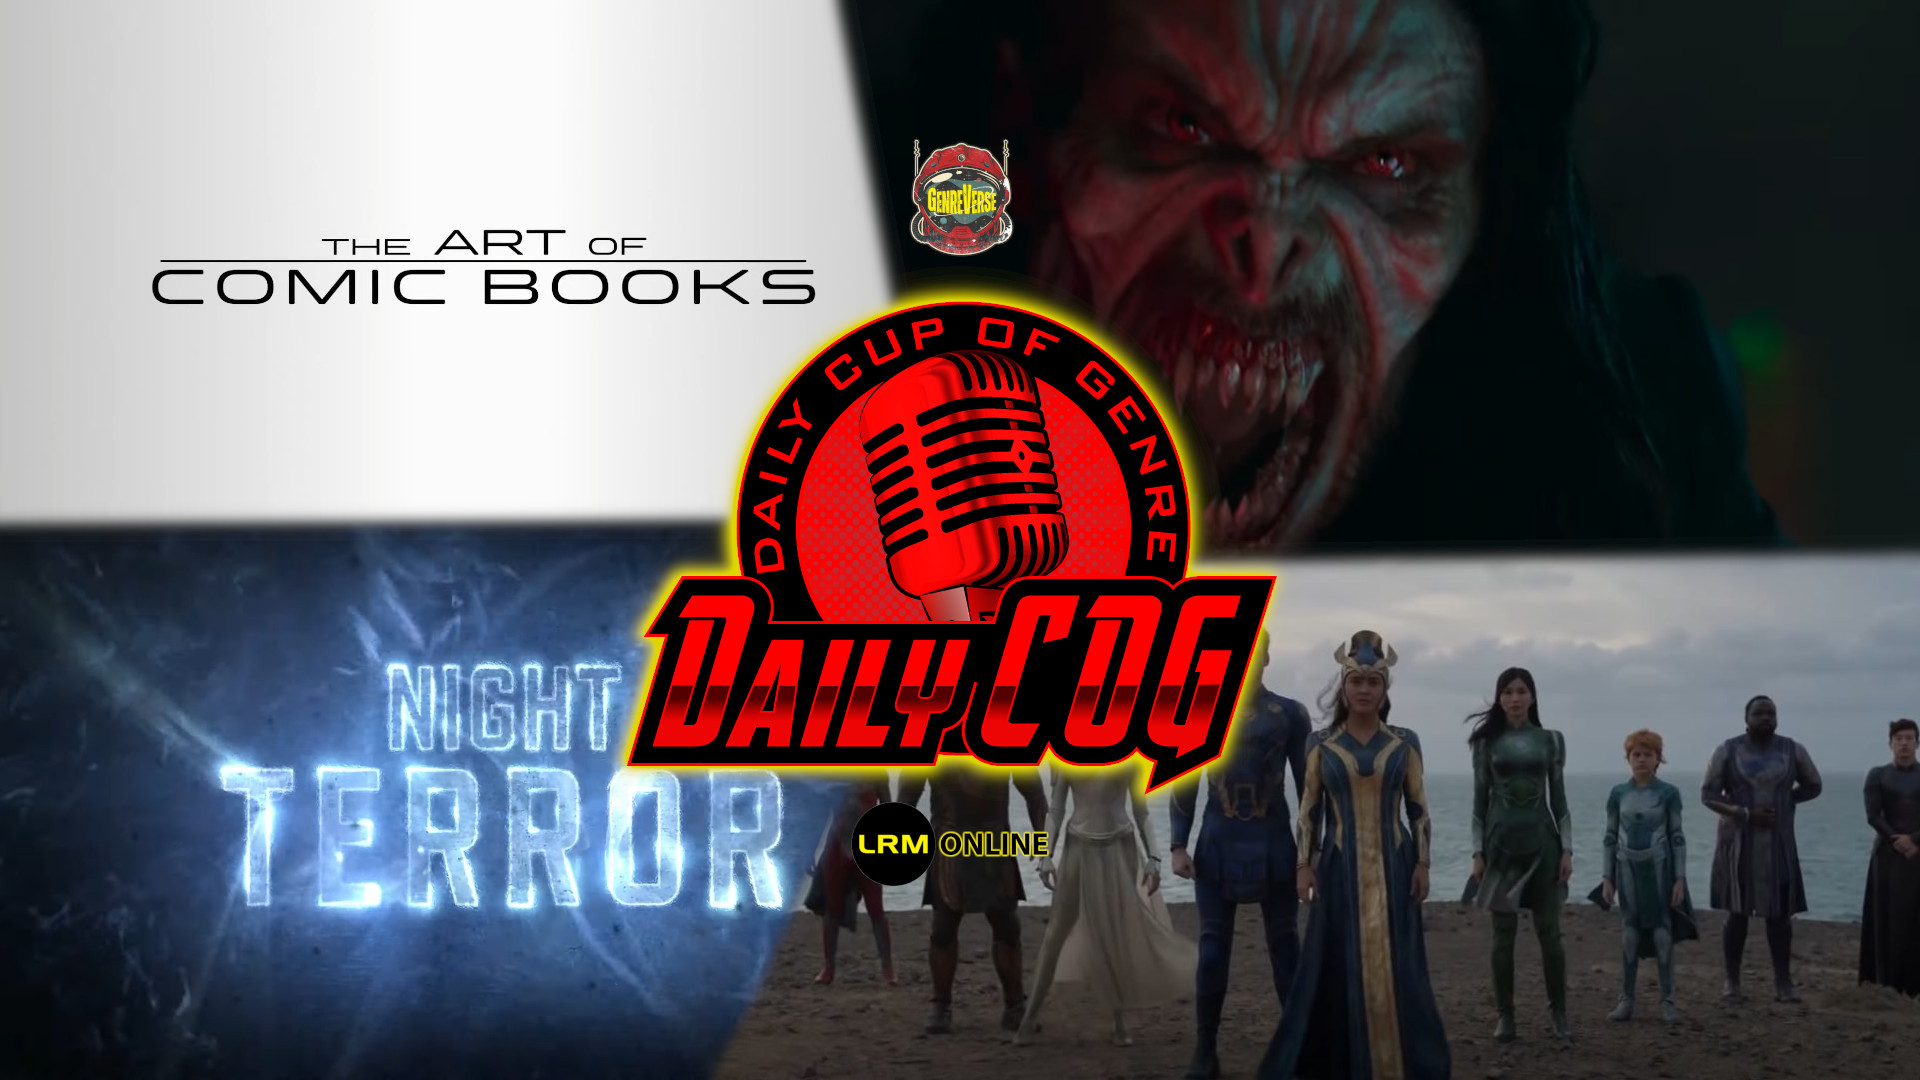 The Eternals Is Officially Rotten, Morbius Trailer Is Decent (But Pointless… Maybe), & The Art Of Comic Books Feature Takes Us Inside Making Comics | Daily COG